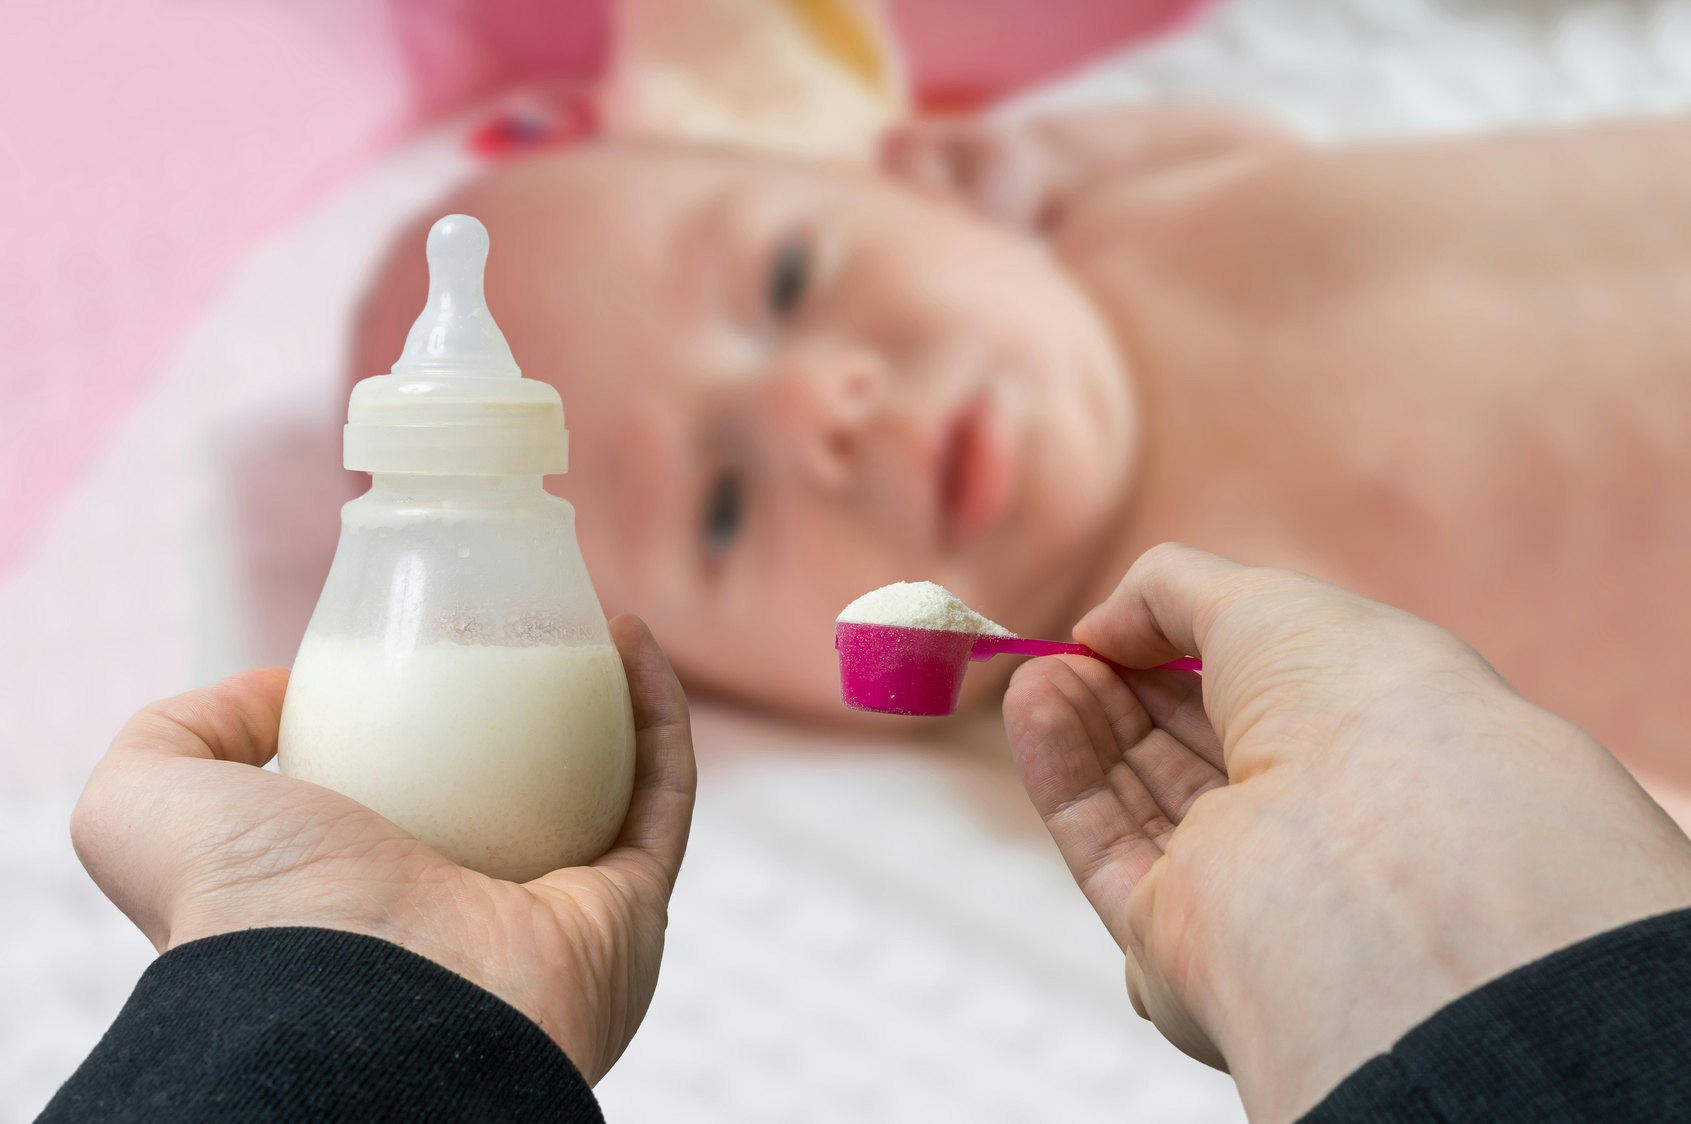 when to supplement formula with breast milk